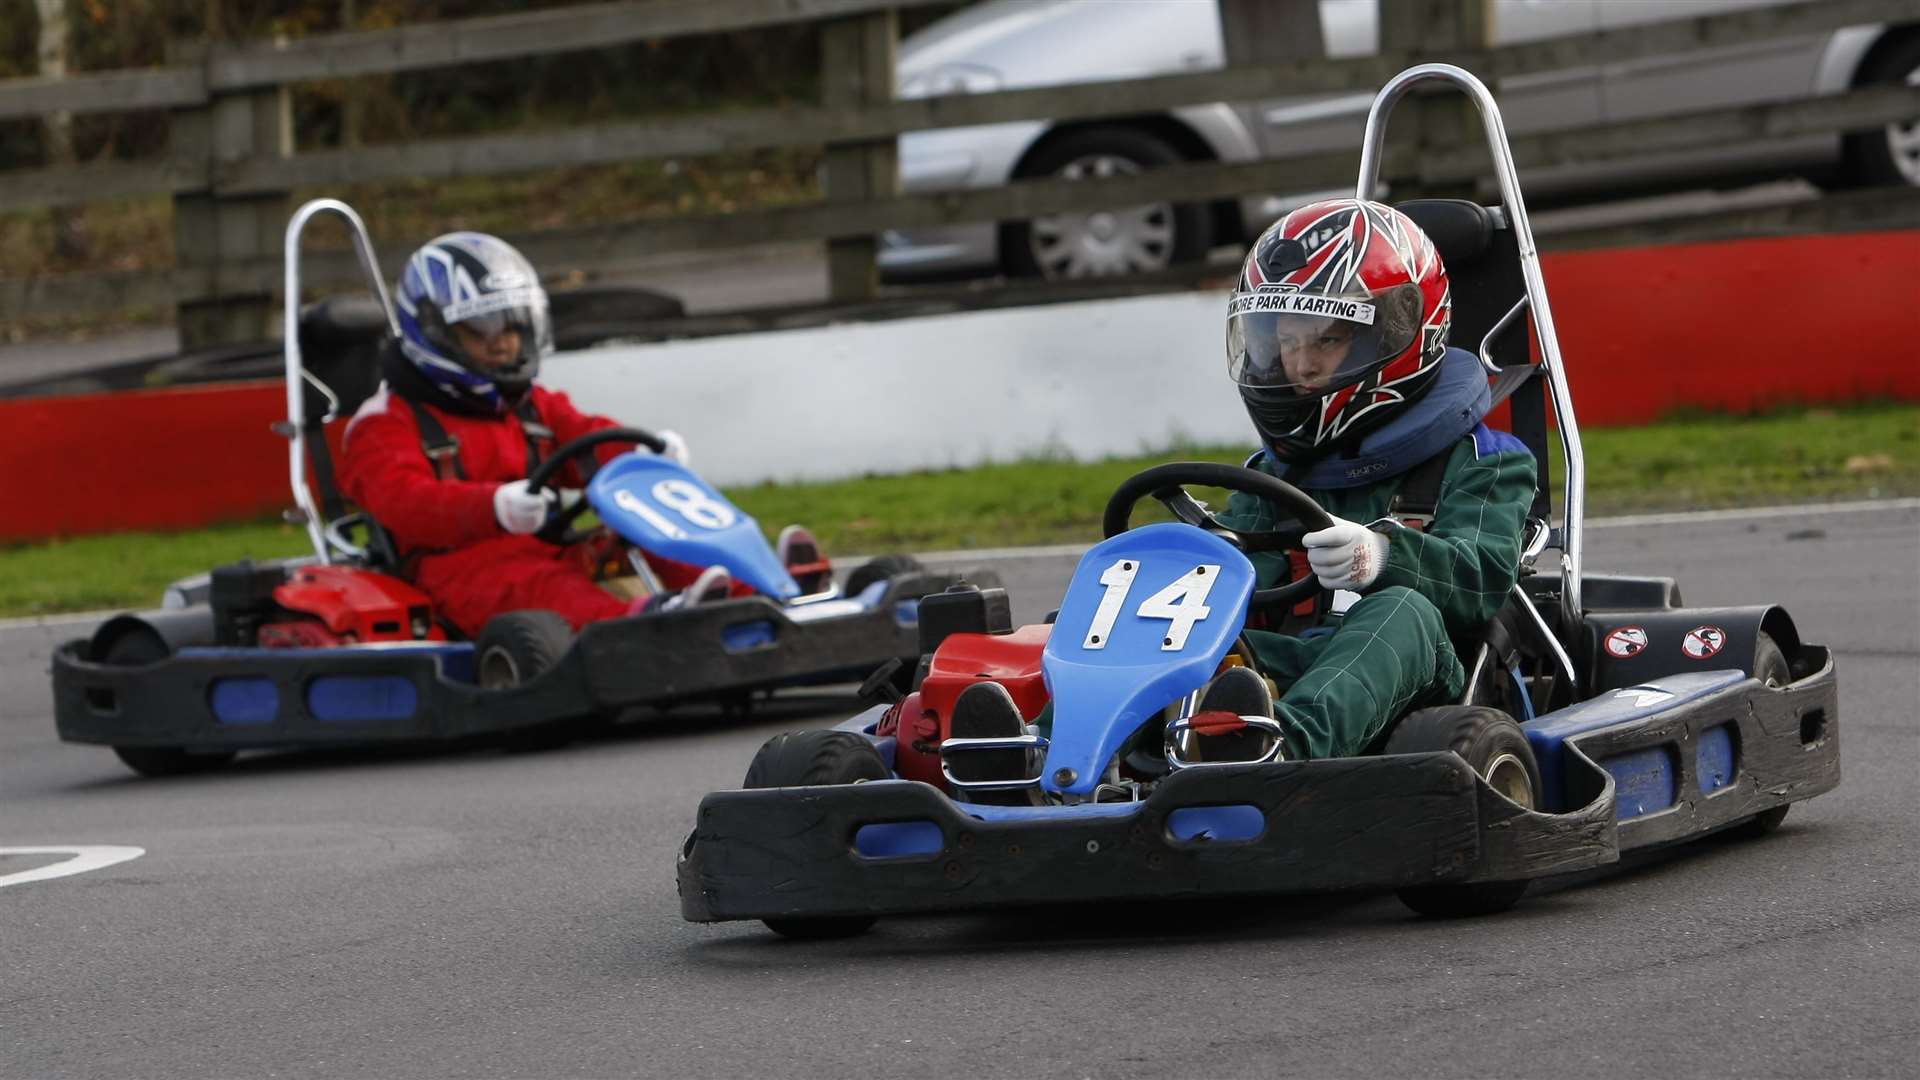 Children as young as four could try arrive-and-drive karting at Buckmore, as seen here in 2008. Picture: Peter Still